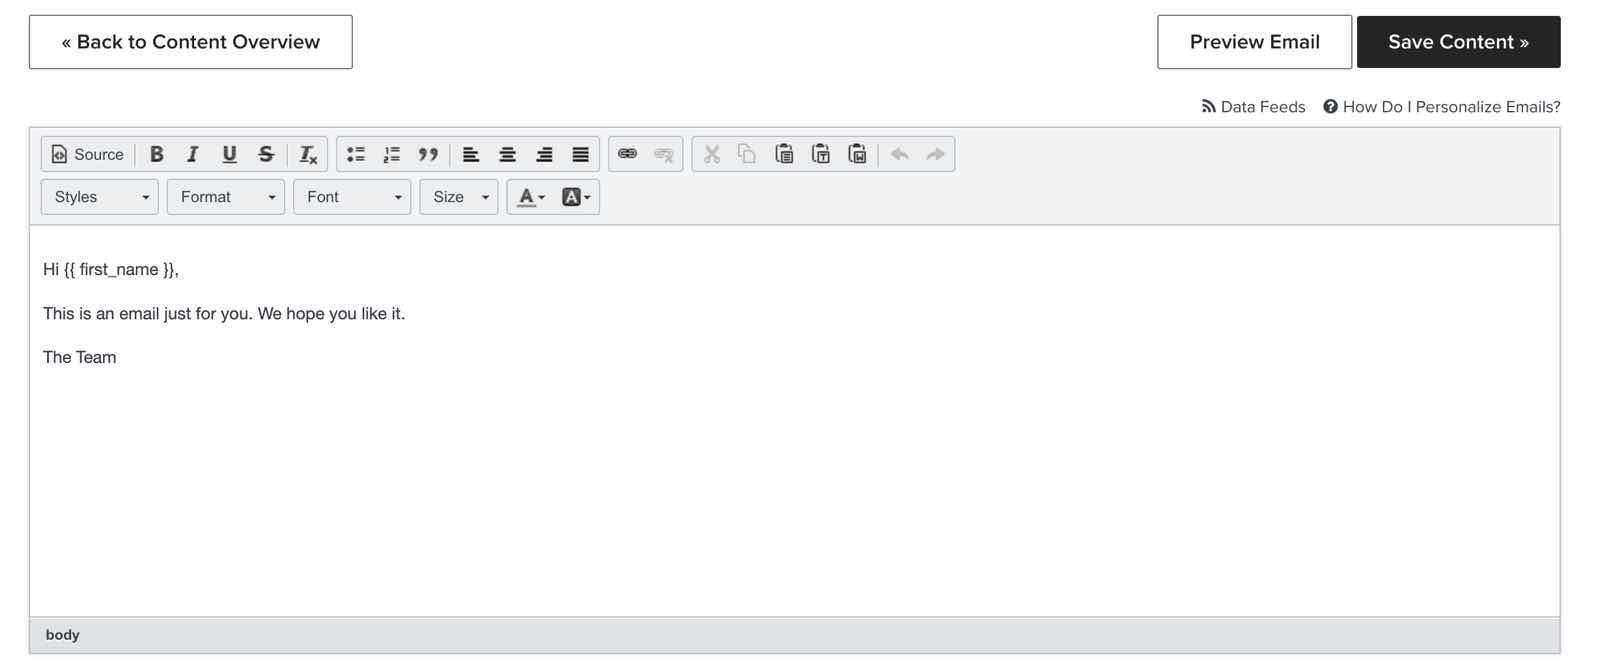 Klaviyo's text only email editor